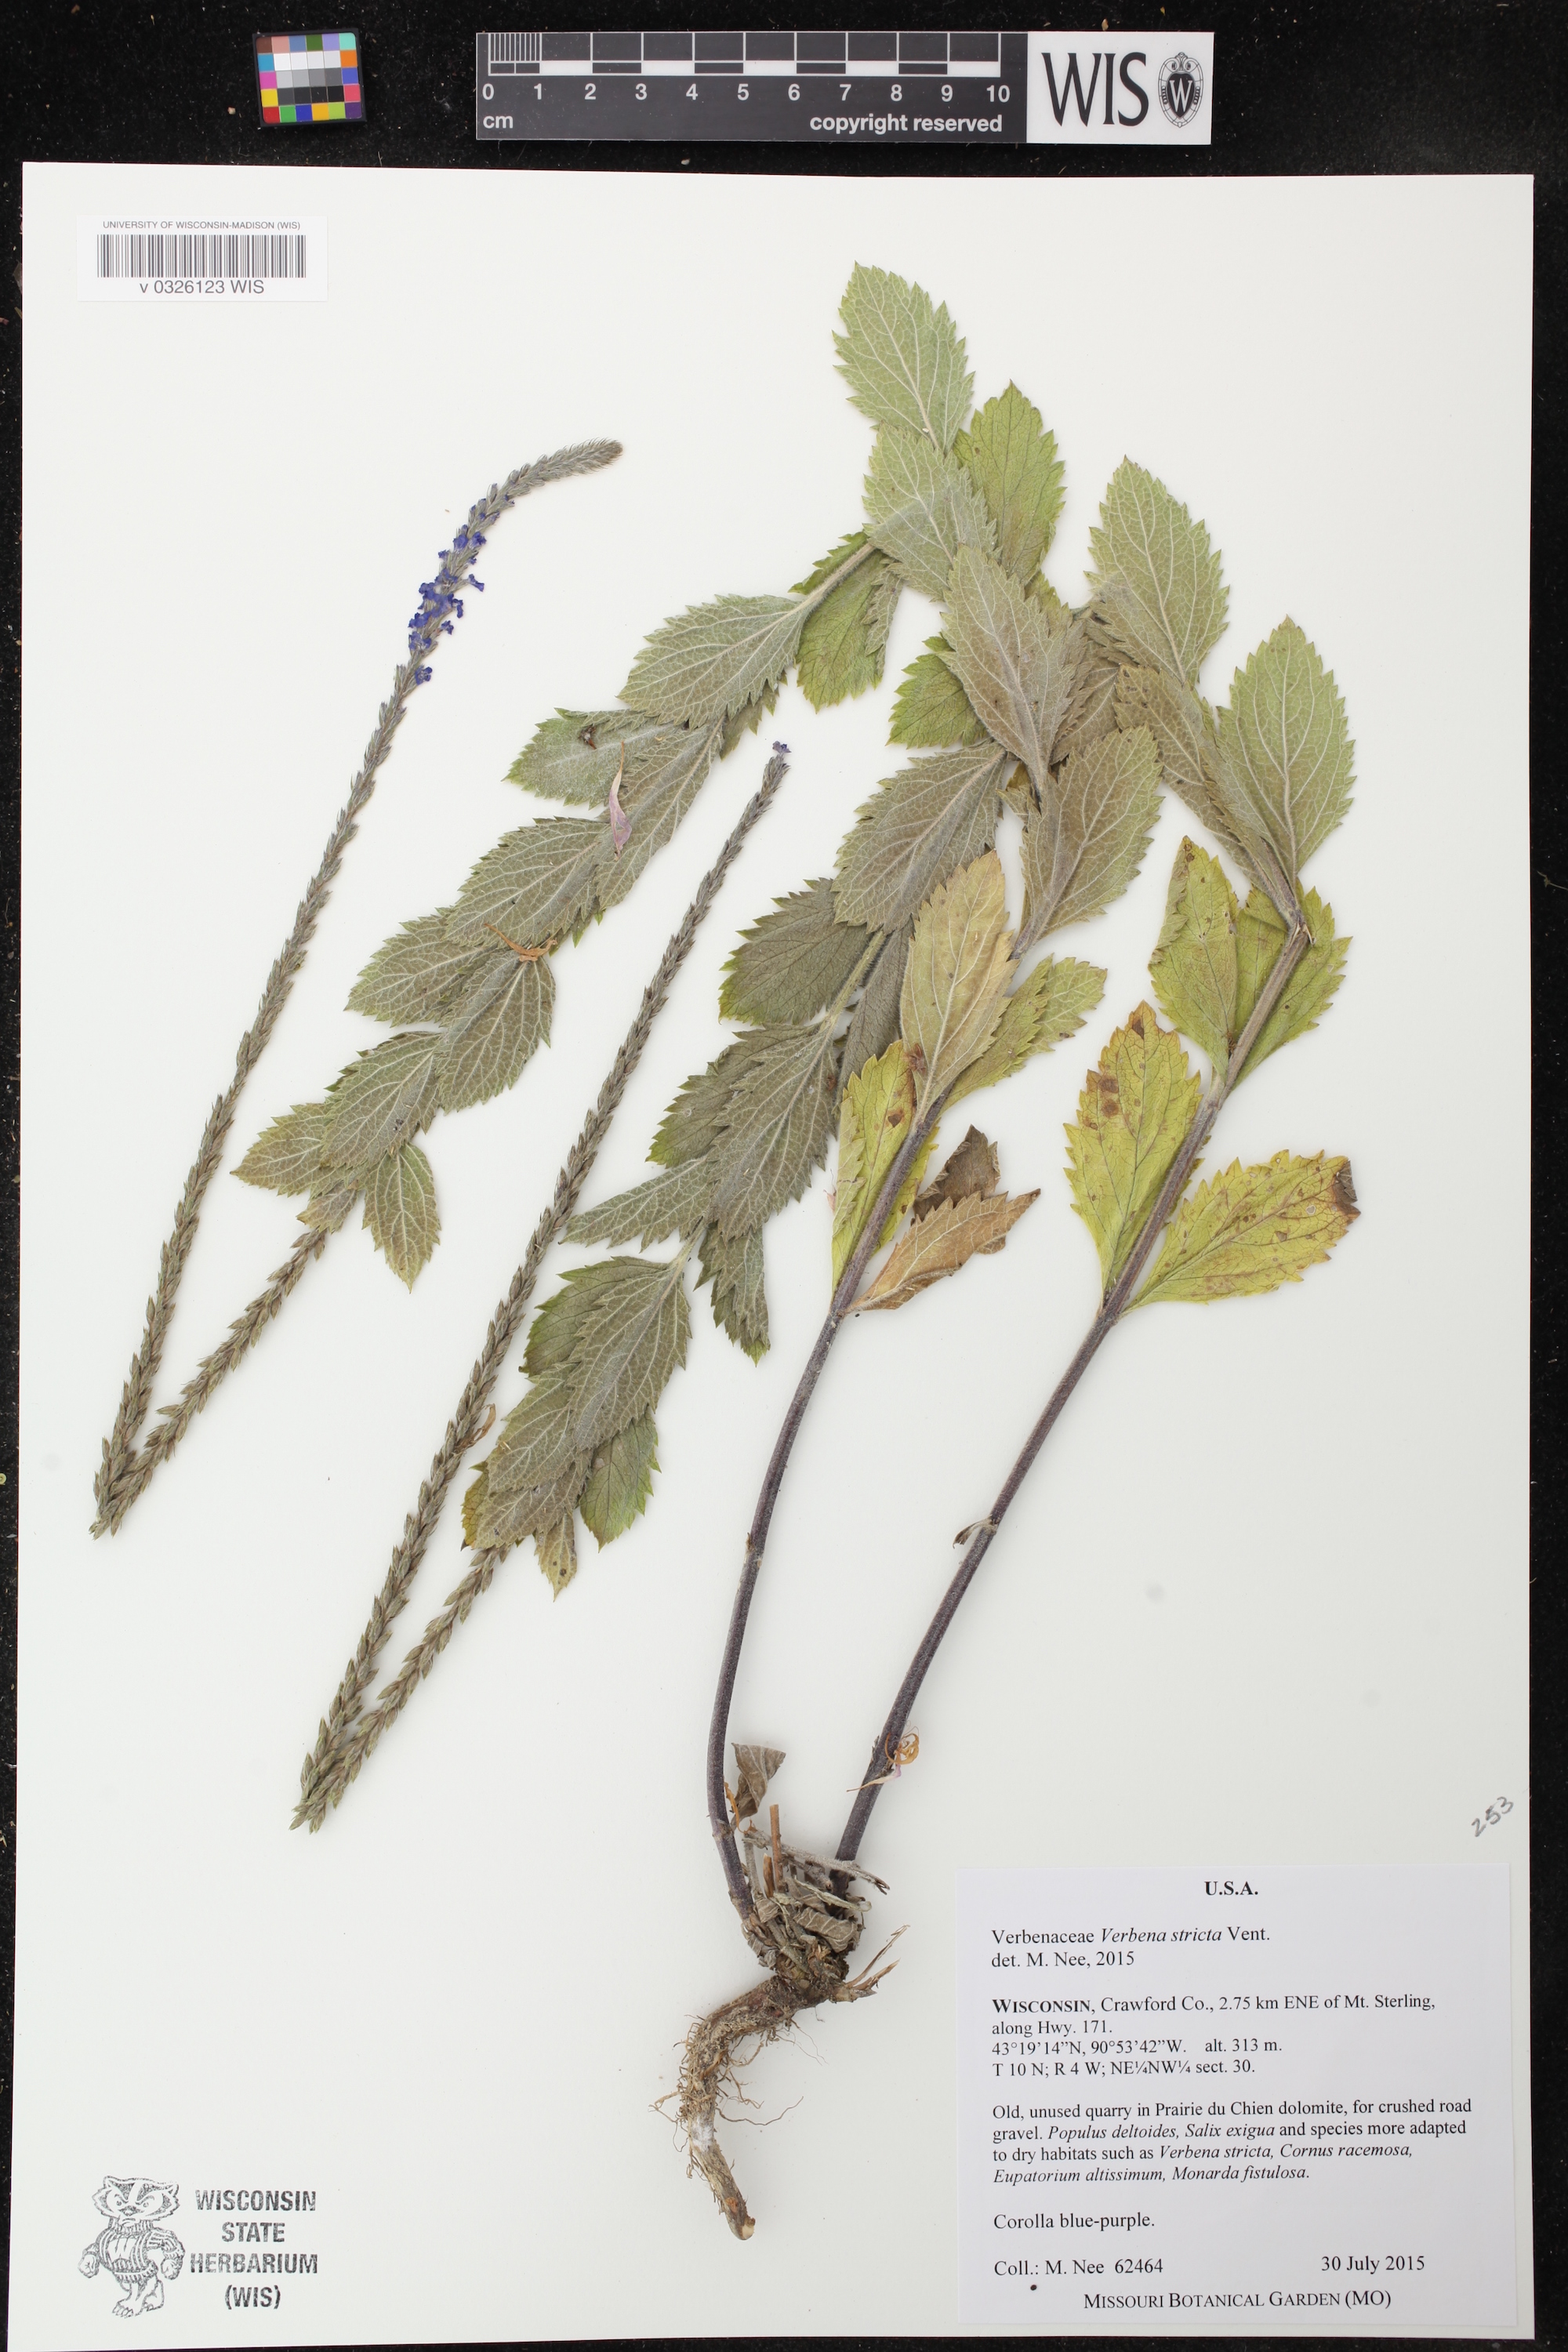 Hoary Vervain specimen collected in Crawford County, Wisconsin on July 30, 2015.